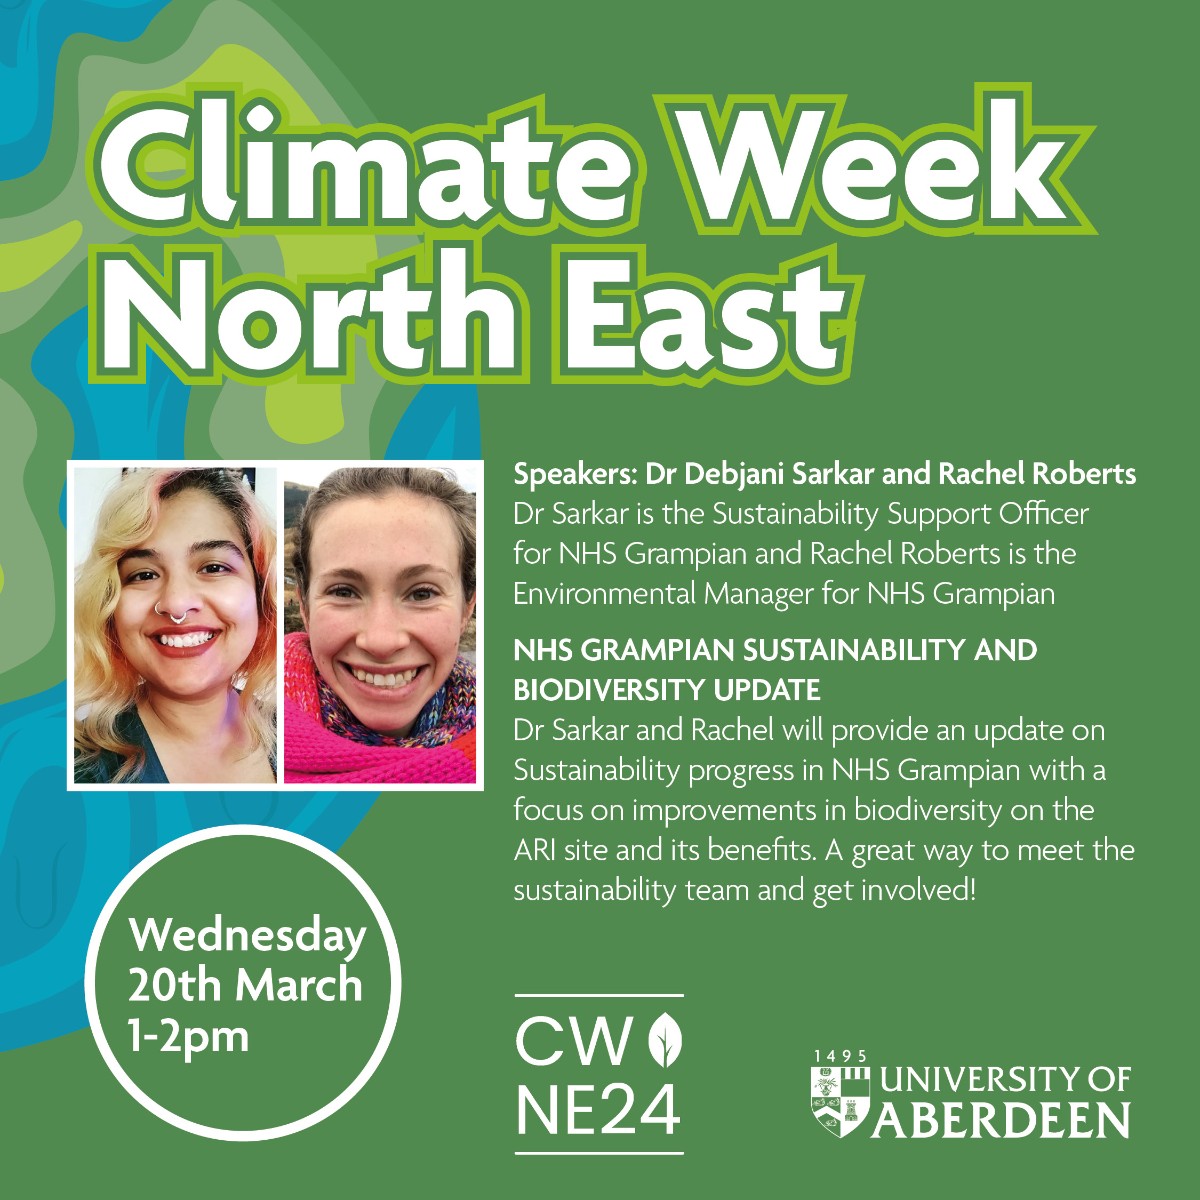 'NHS Grampian Sustainability and Biodiversity Update' at 1pm (UK time) today. This talk will be hosted on Microsoft Teams and is open to all to attend. Register to attend for free here: abdn.io/wU #ClimateWeekNorthEast #CWNE24 @NescanHub @NHSGrampian